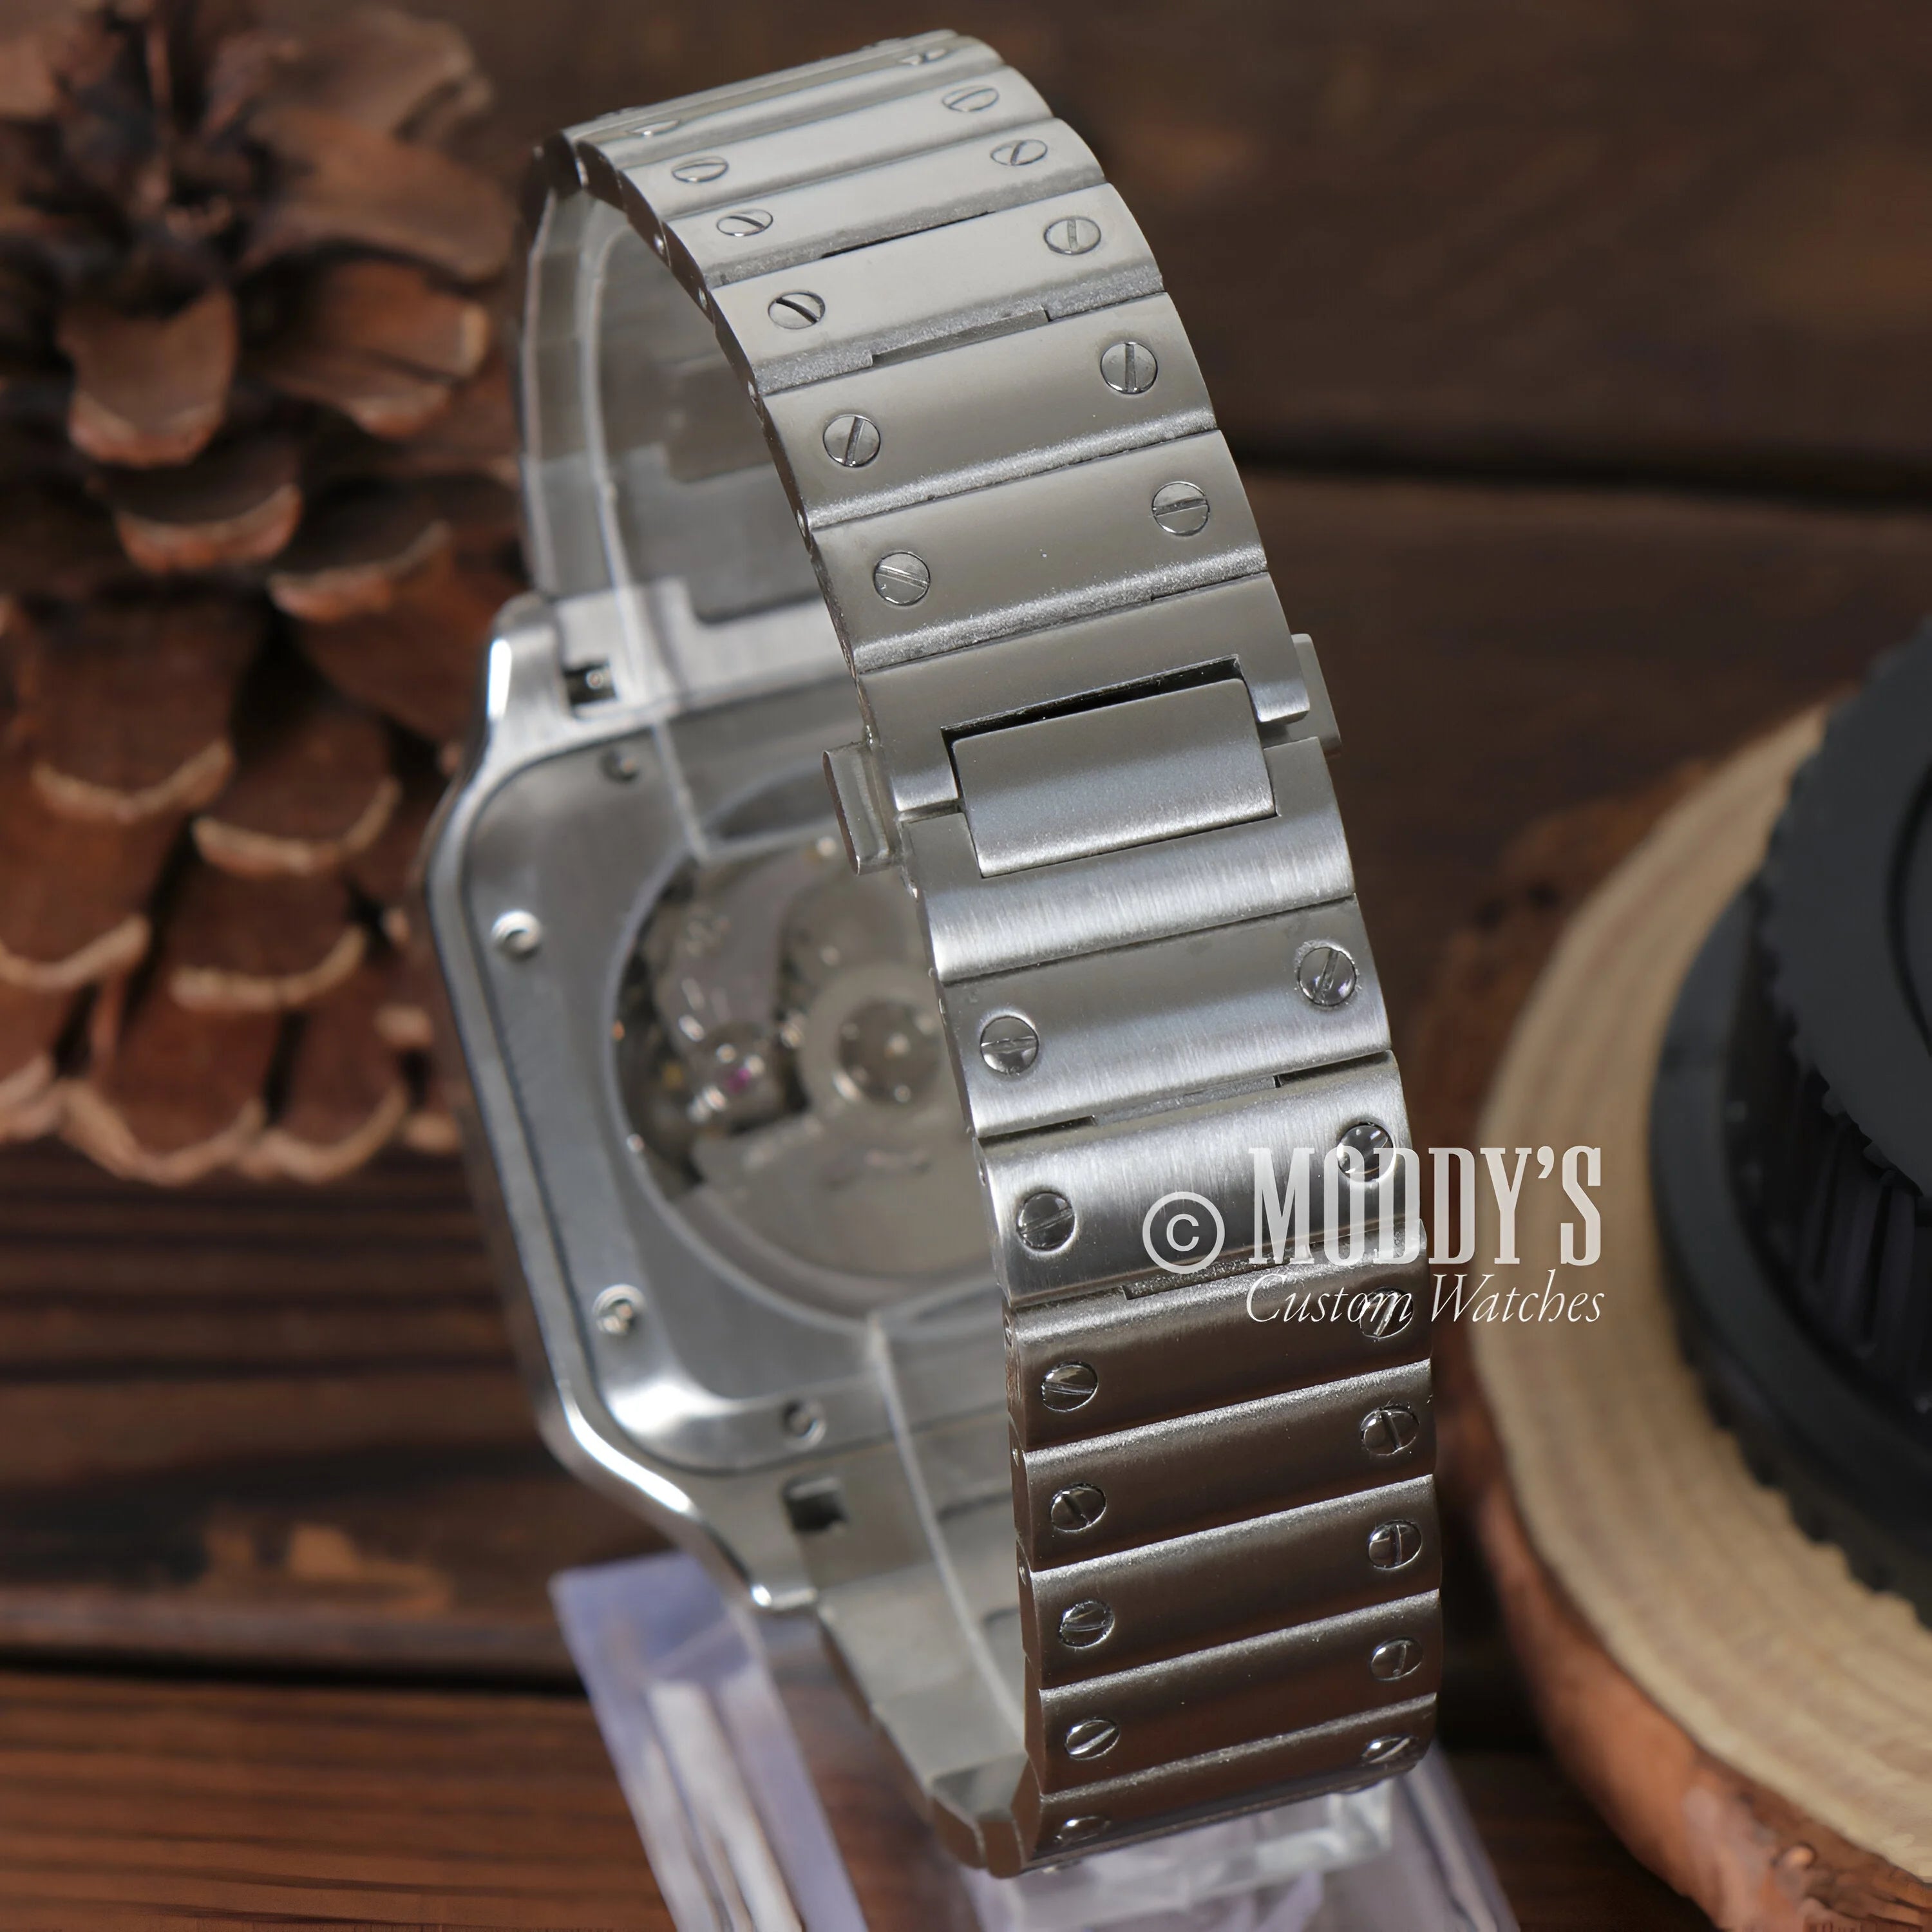 Silver Metal Watch With Screw-detailed Band And Seiko Nh35 Automatic Movement